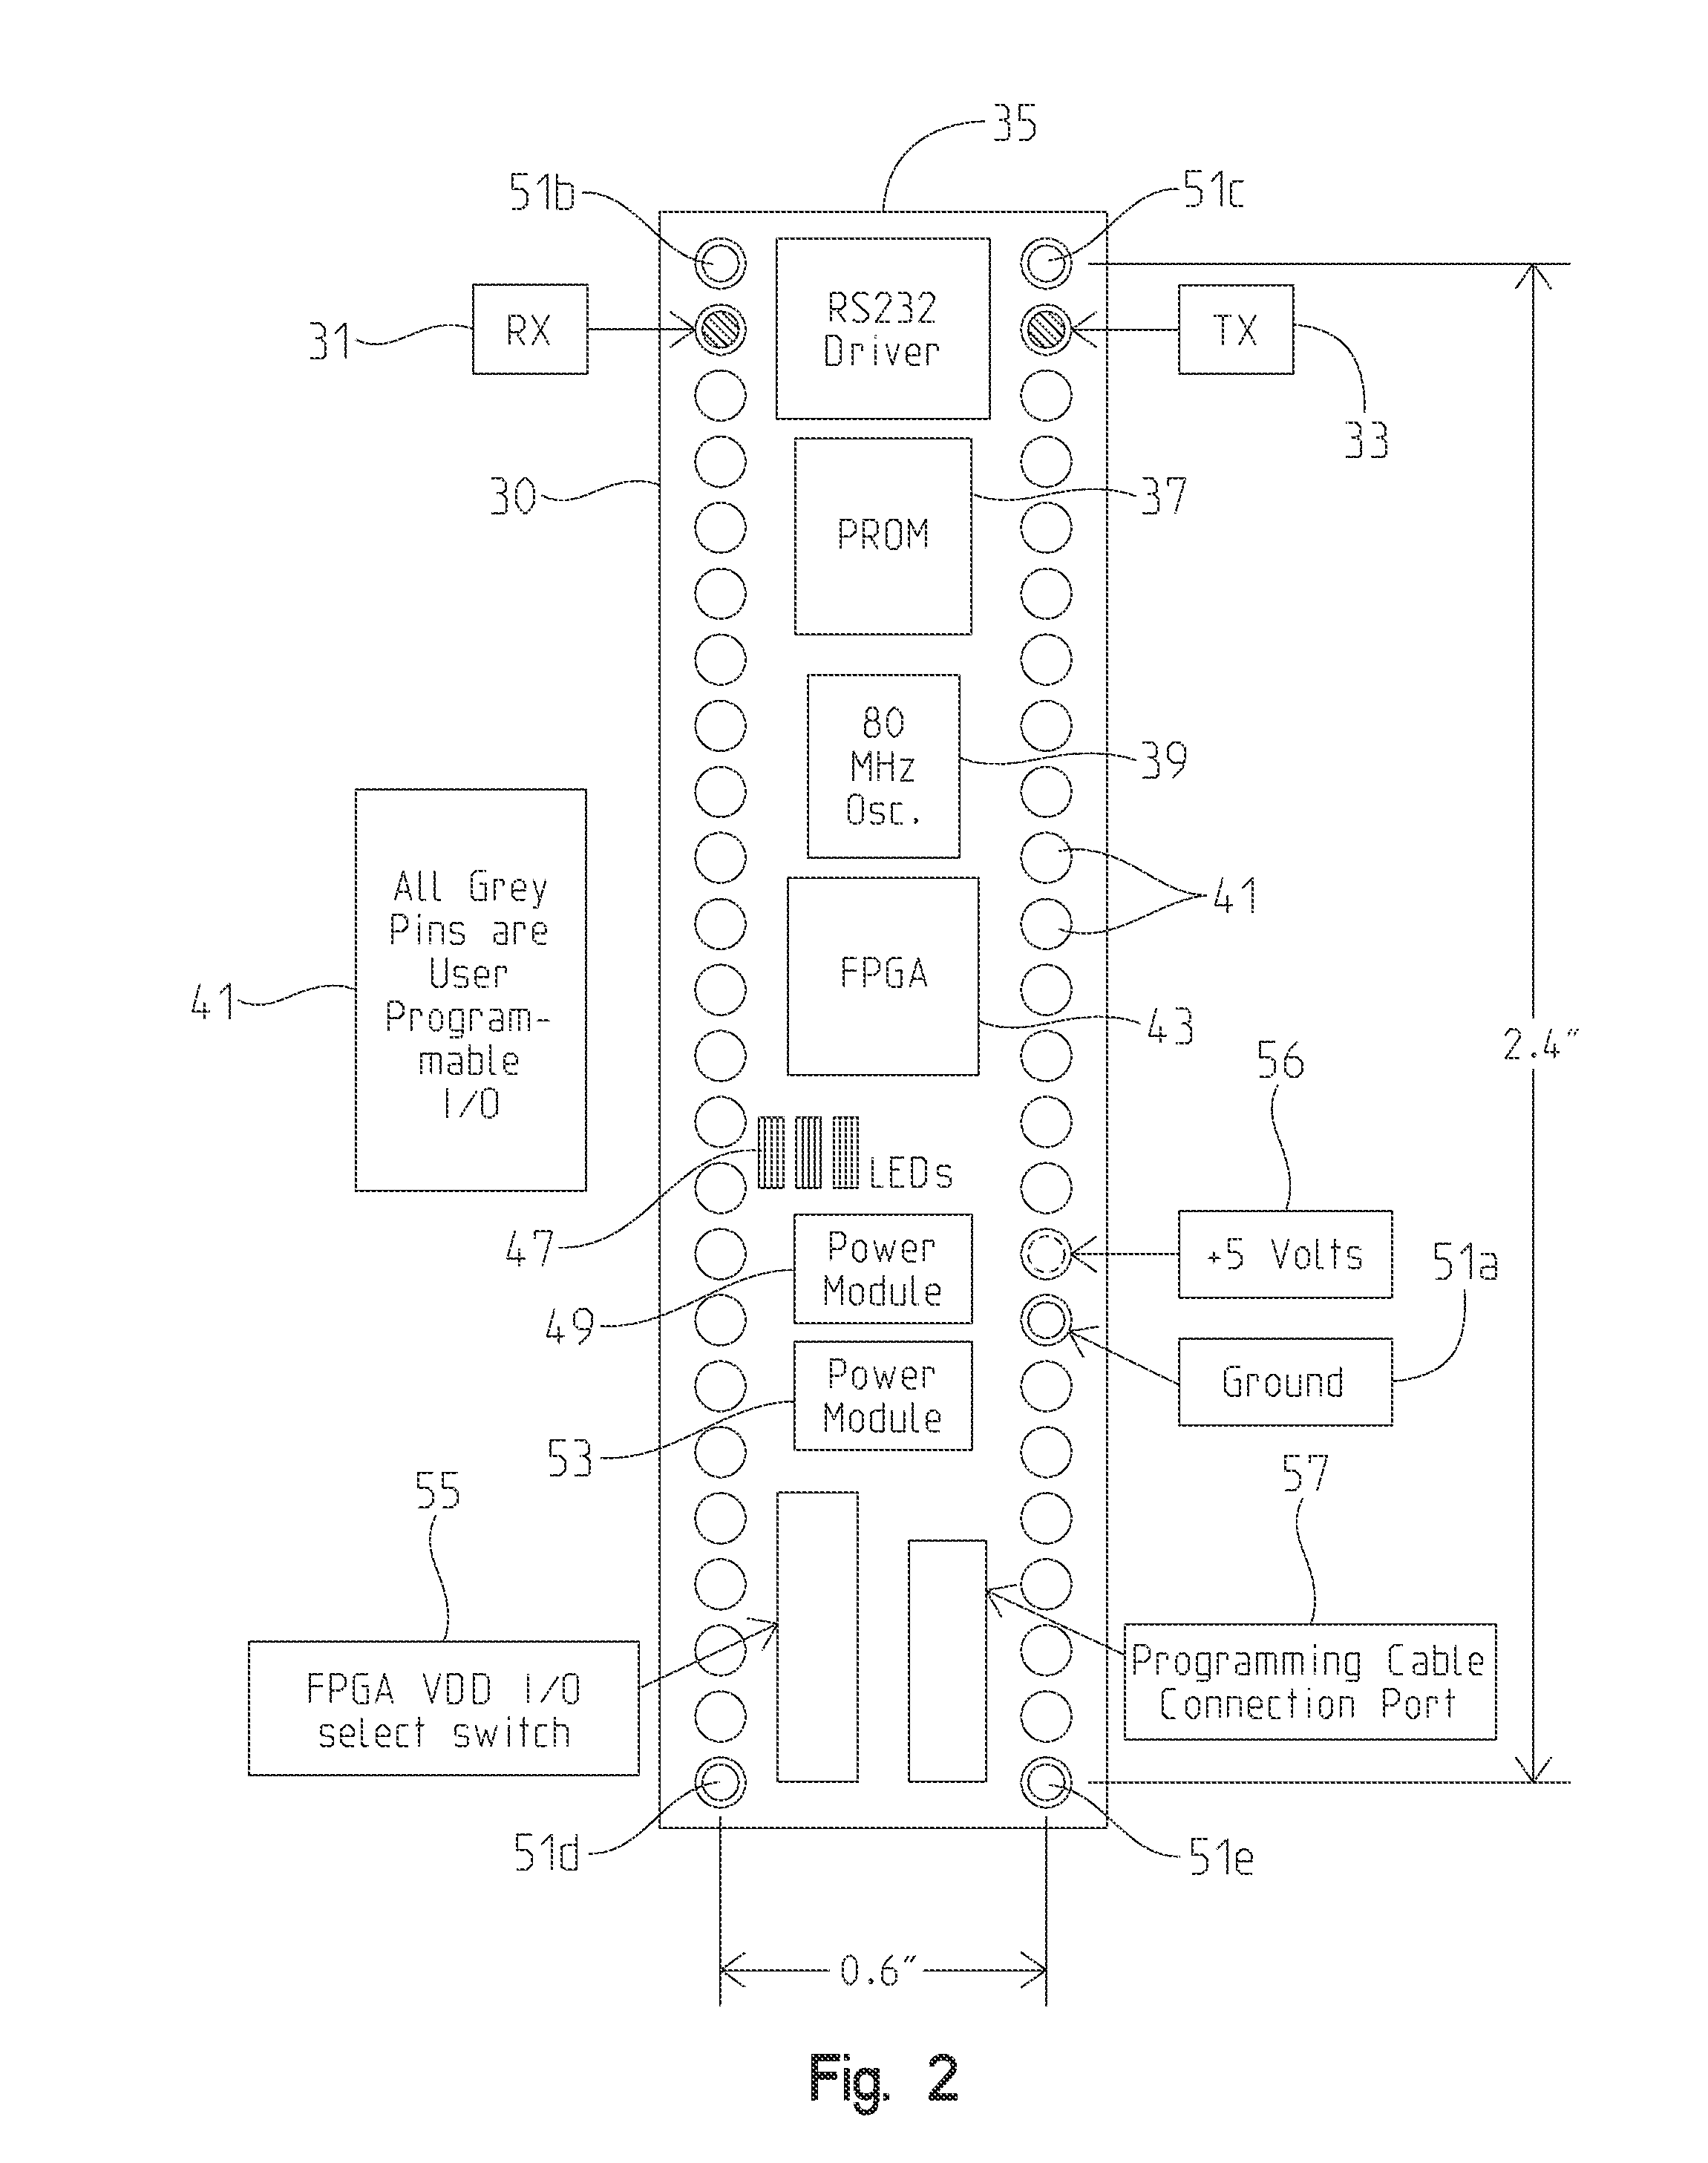 Compact electronics test system having user programmable device interfaces and on-board functions adapted for use with multiple devices under test and in various environments including ones in proximity to a radiation field